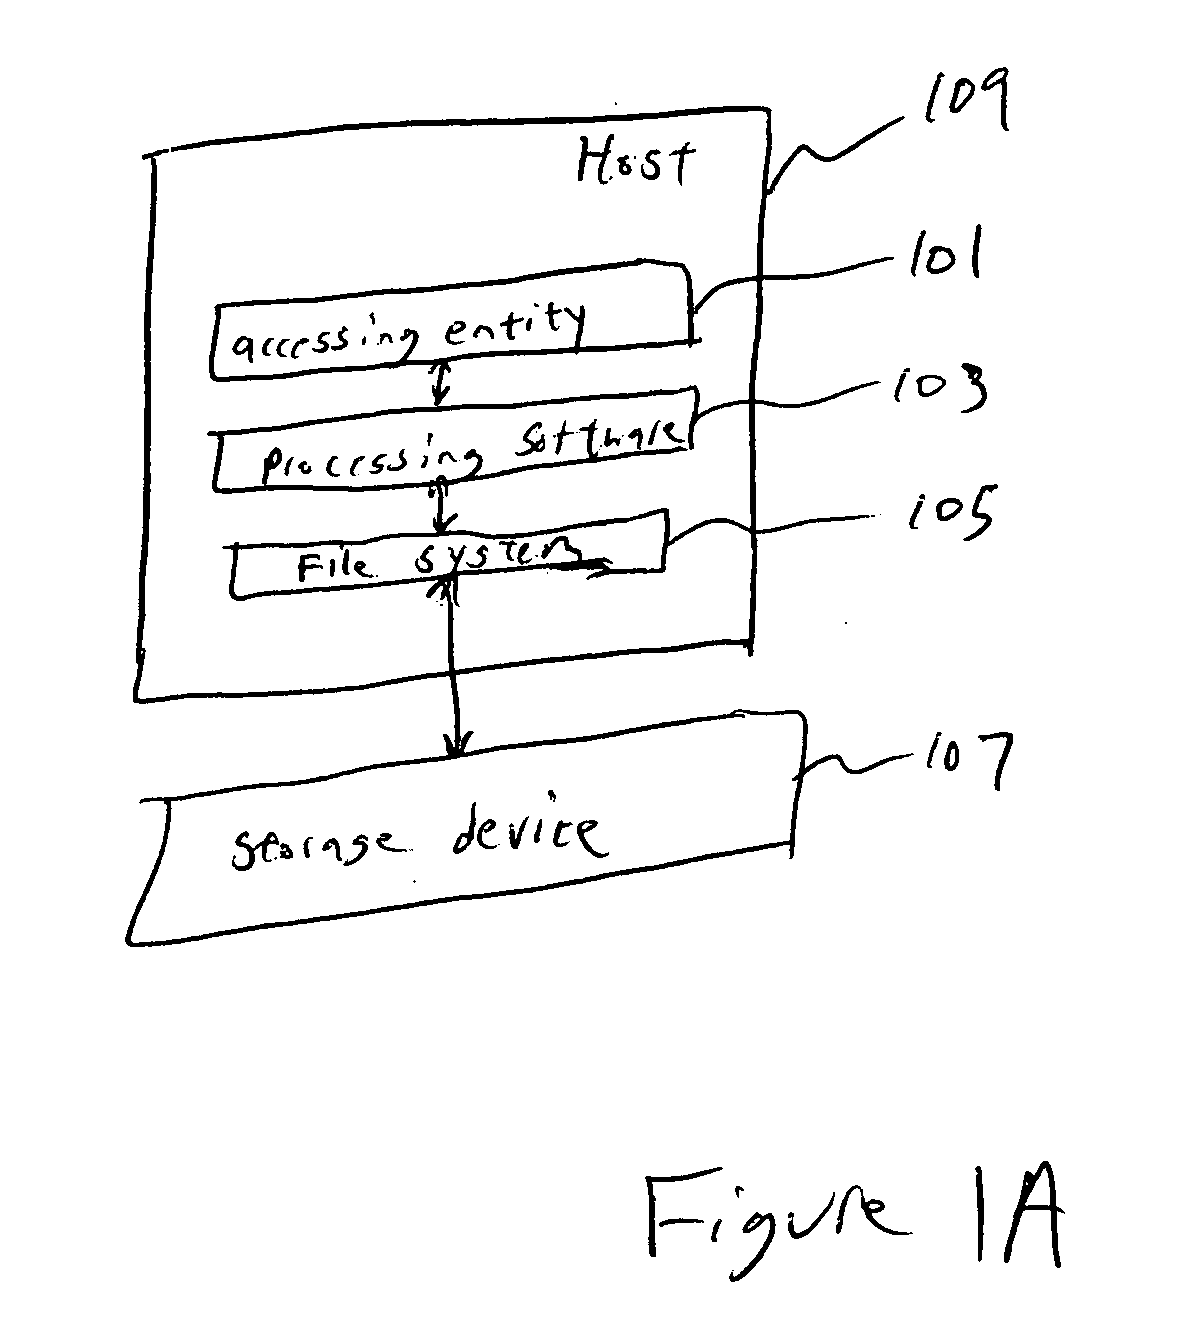 Methods and apparatus for managing the storage of content in a file system